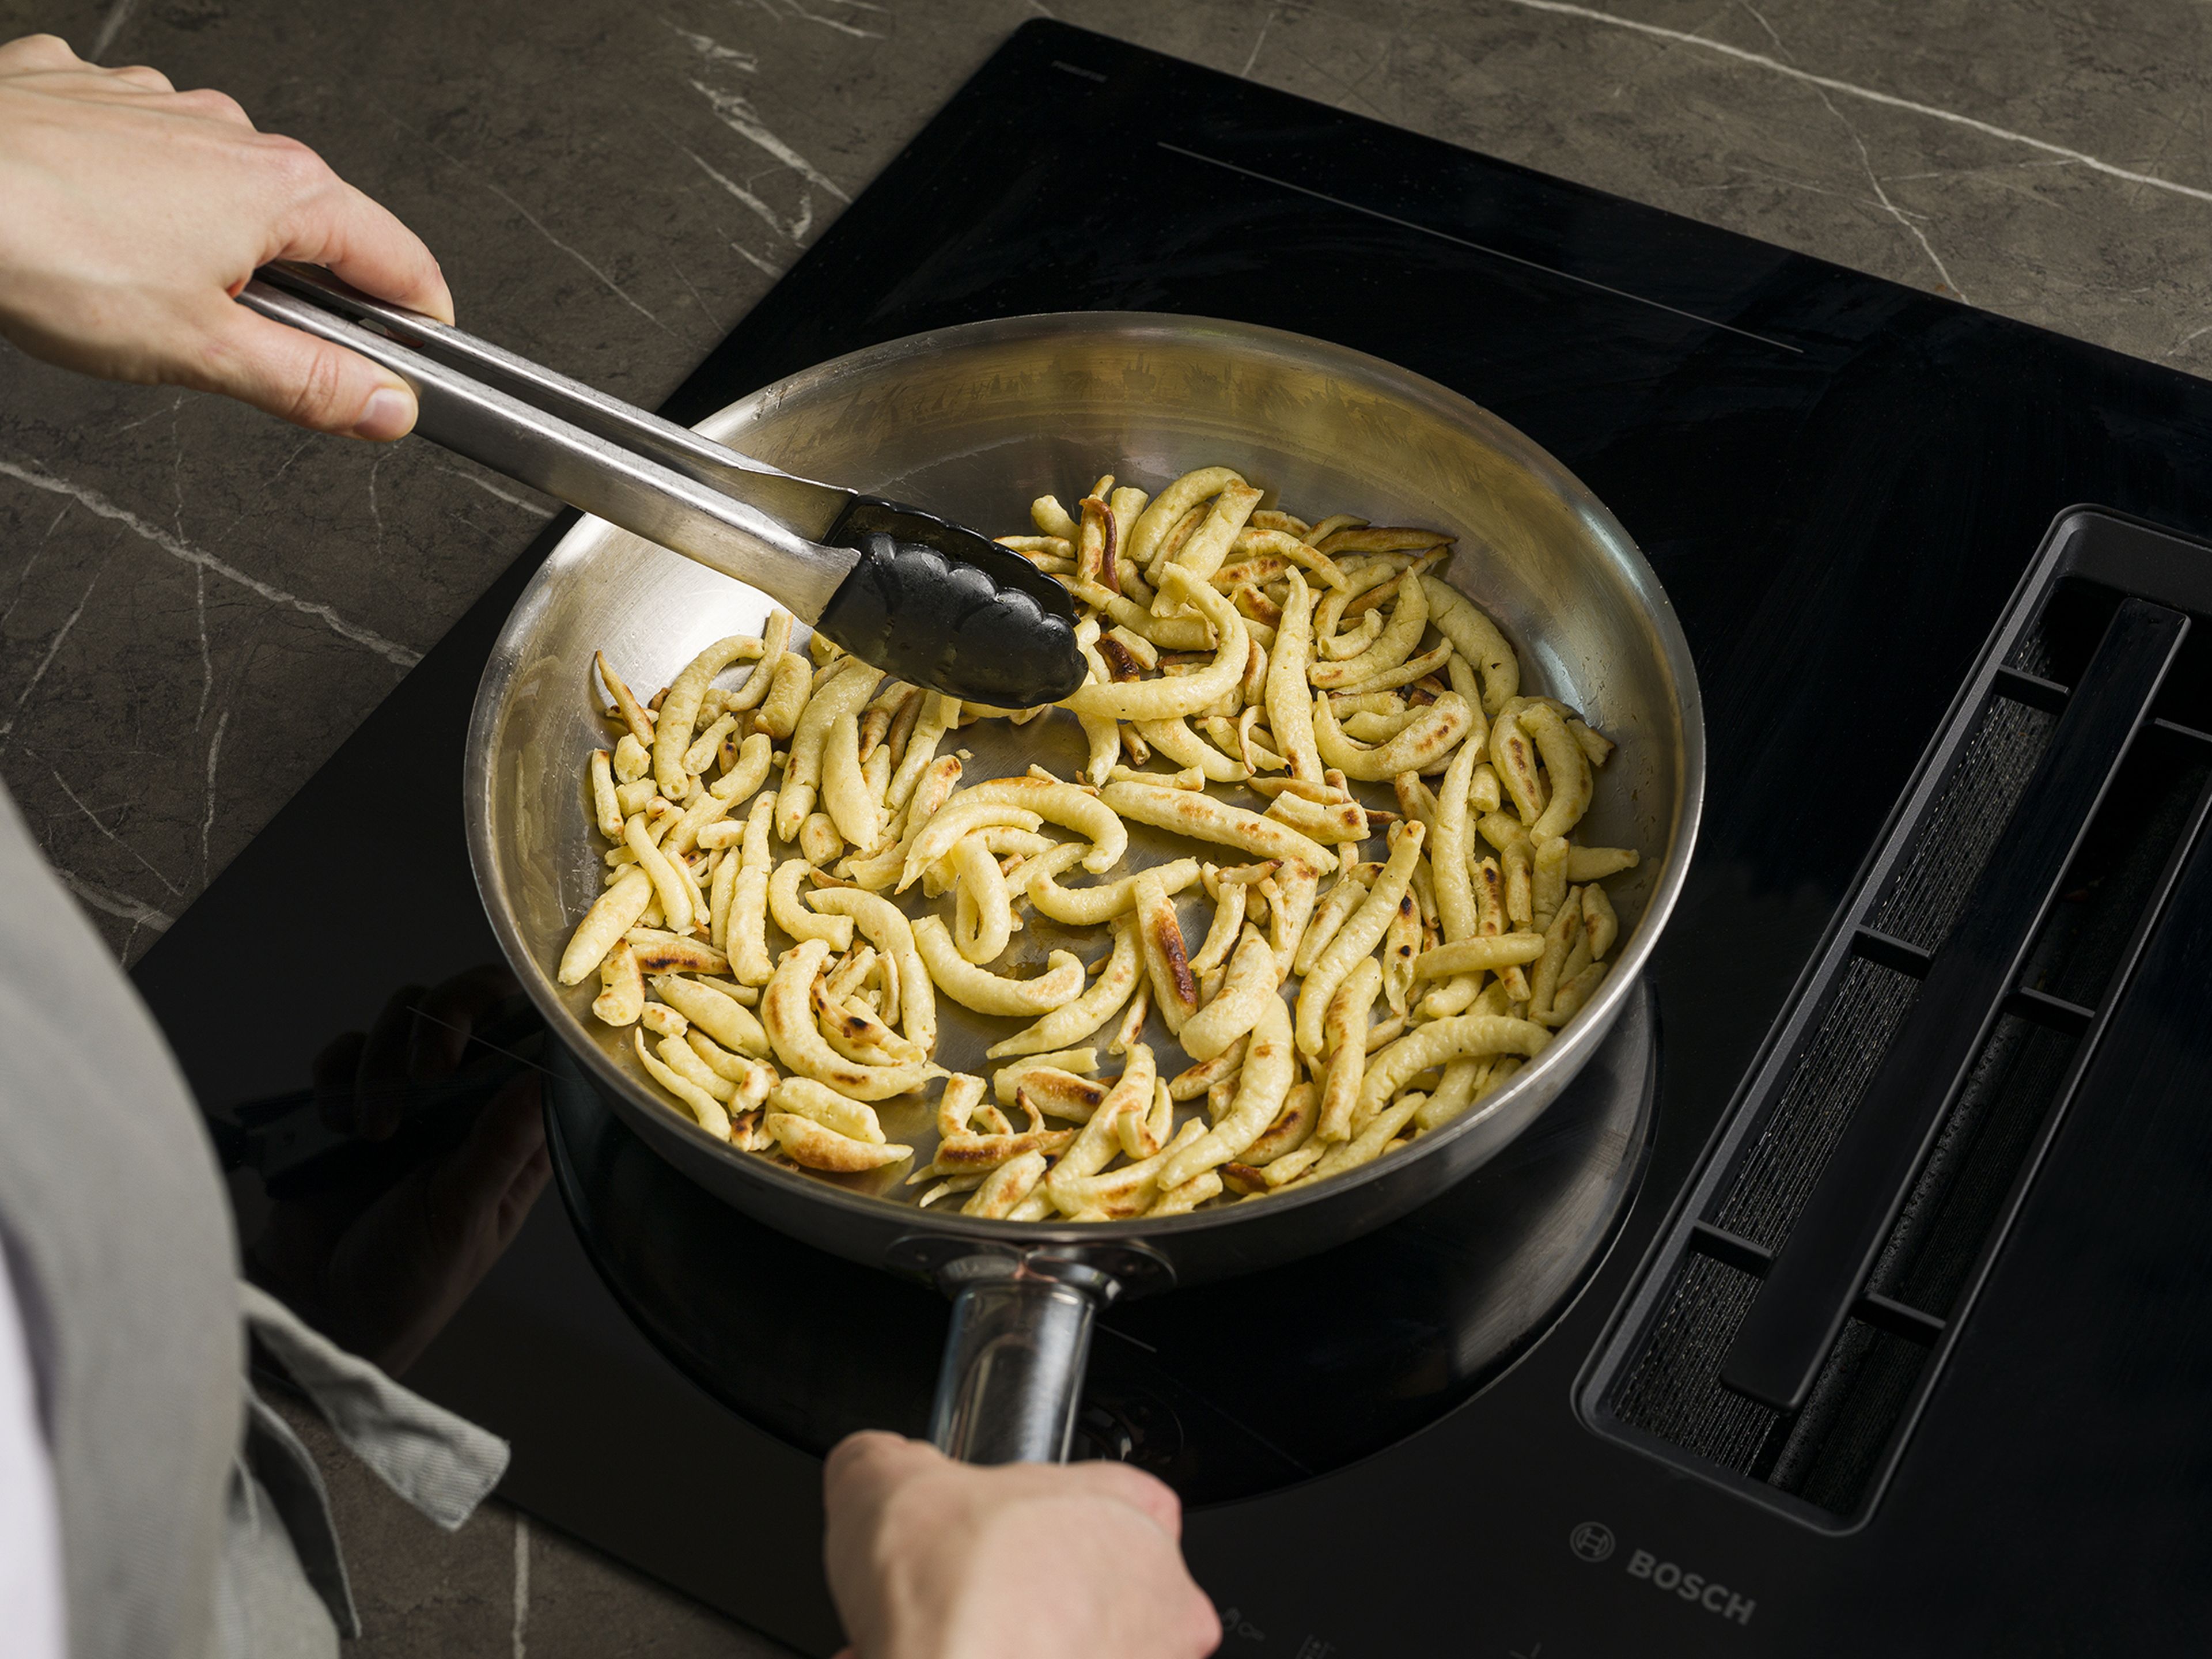 Heat the remaining oil in a pan and fry spätzle over high heat for approx. 4–5 min. until crispy and golden brown. Remove from the pan.